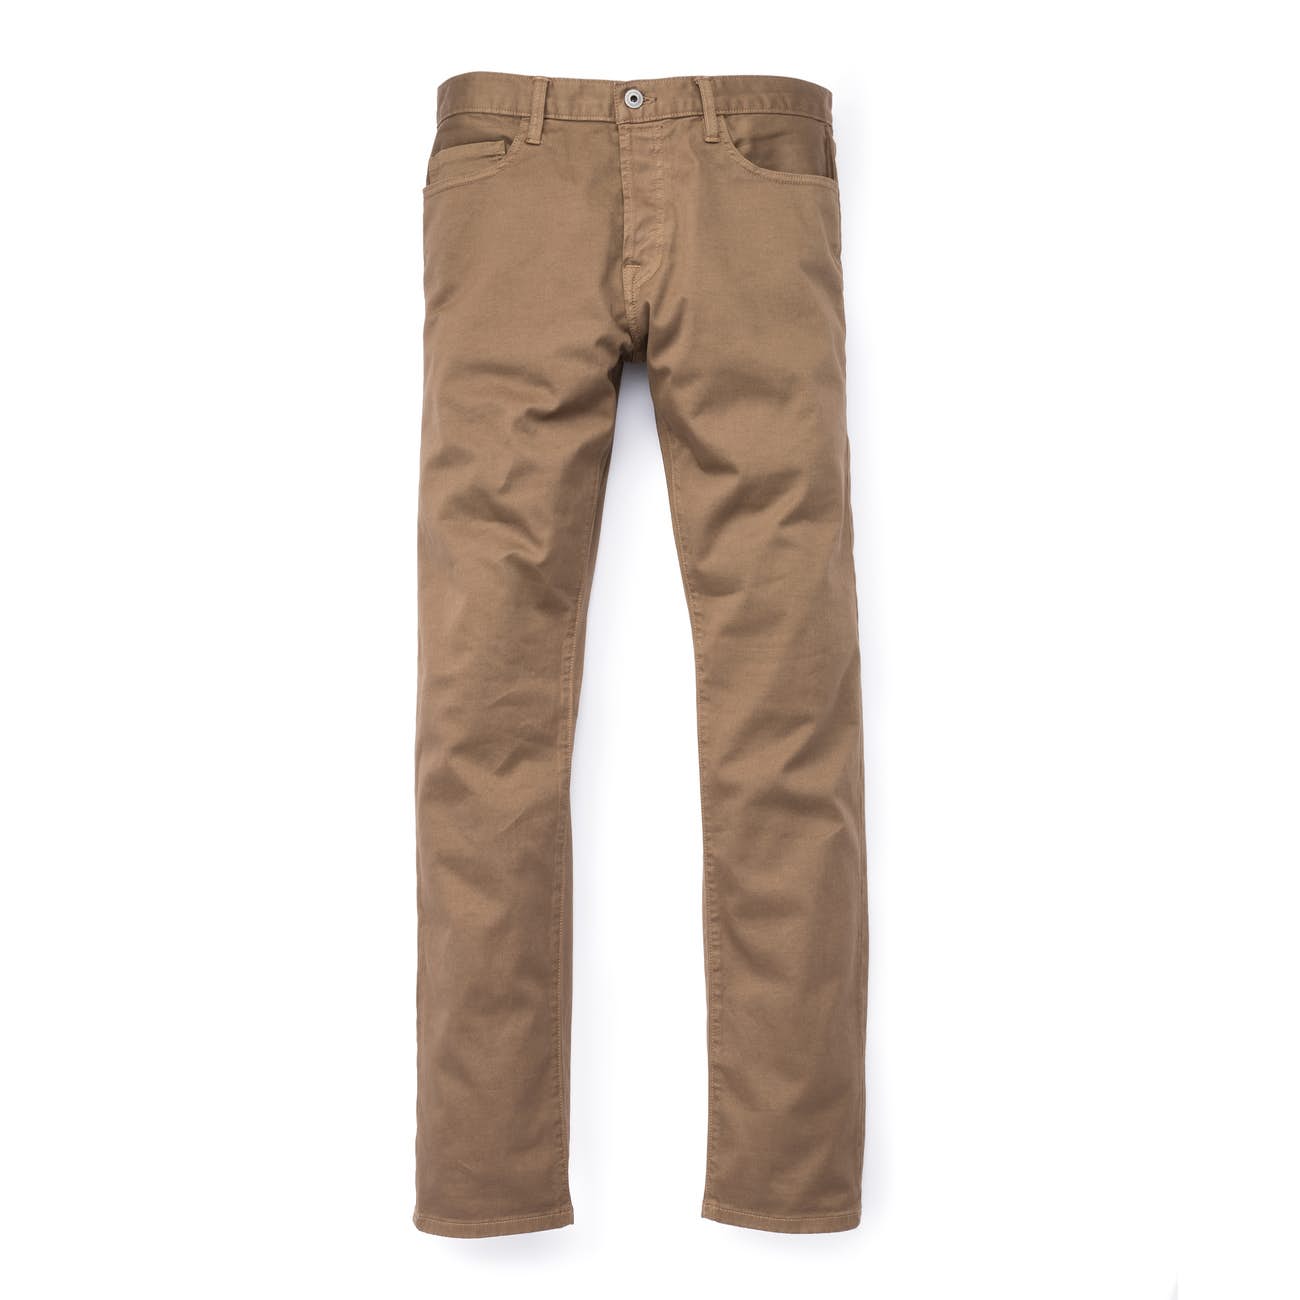 Flint and Tinder 365 Pant Front